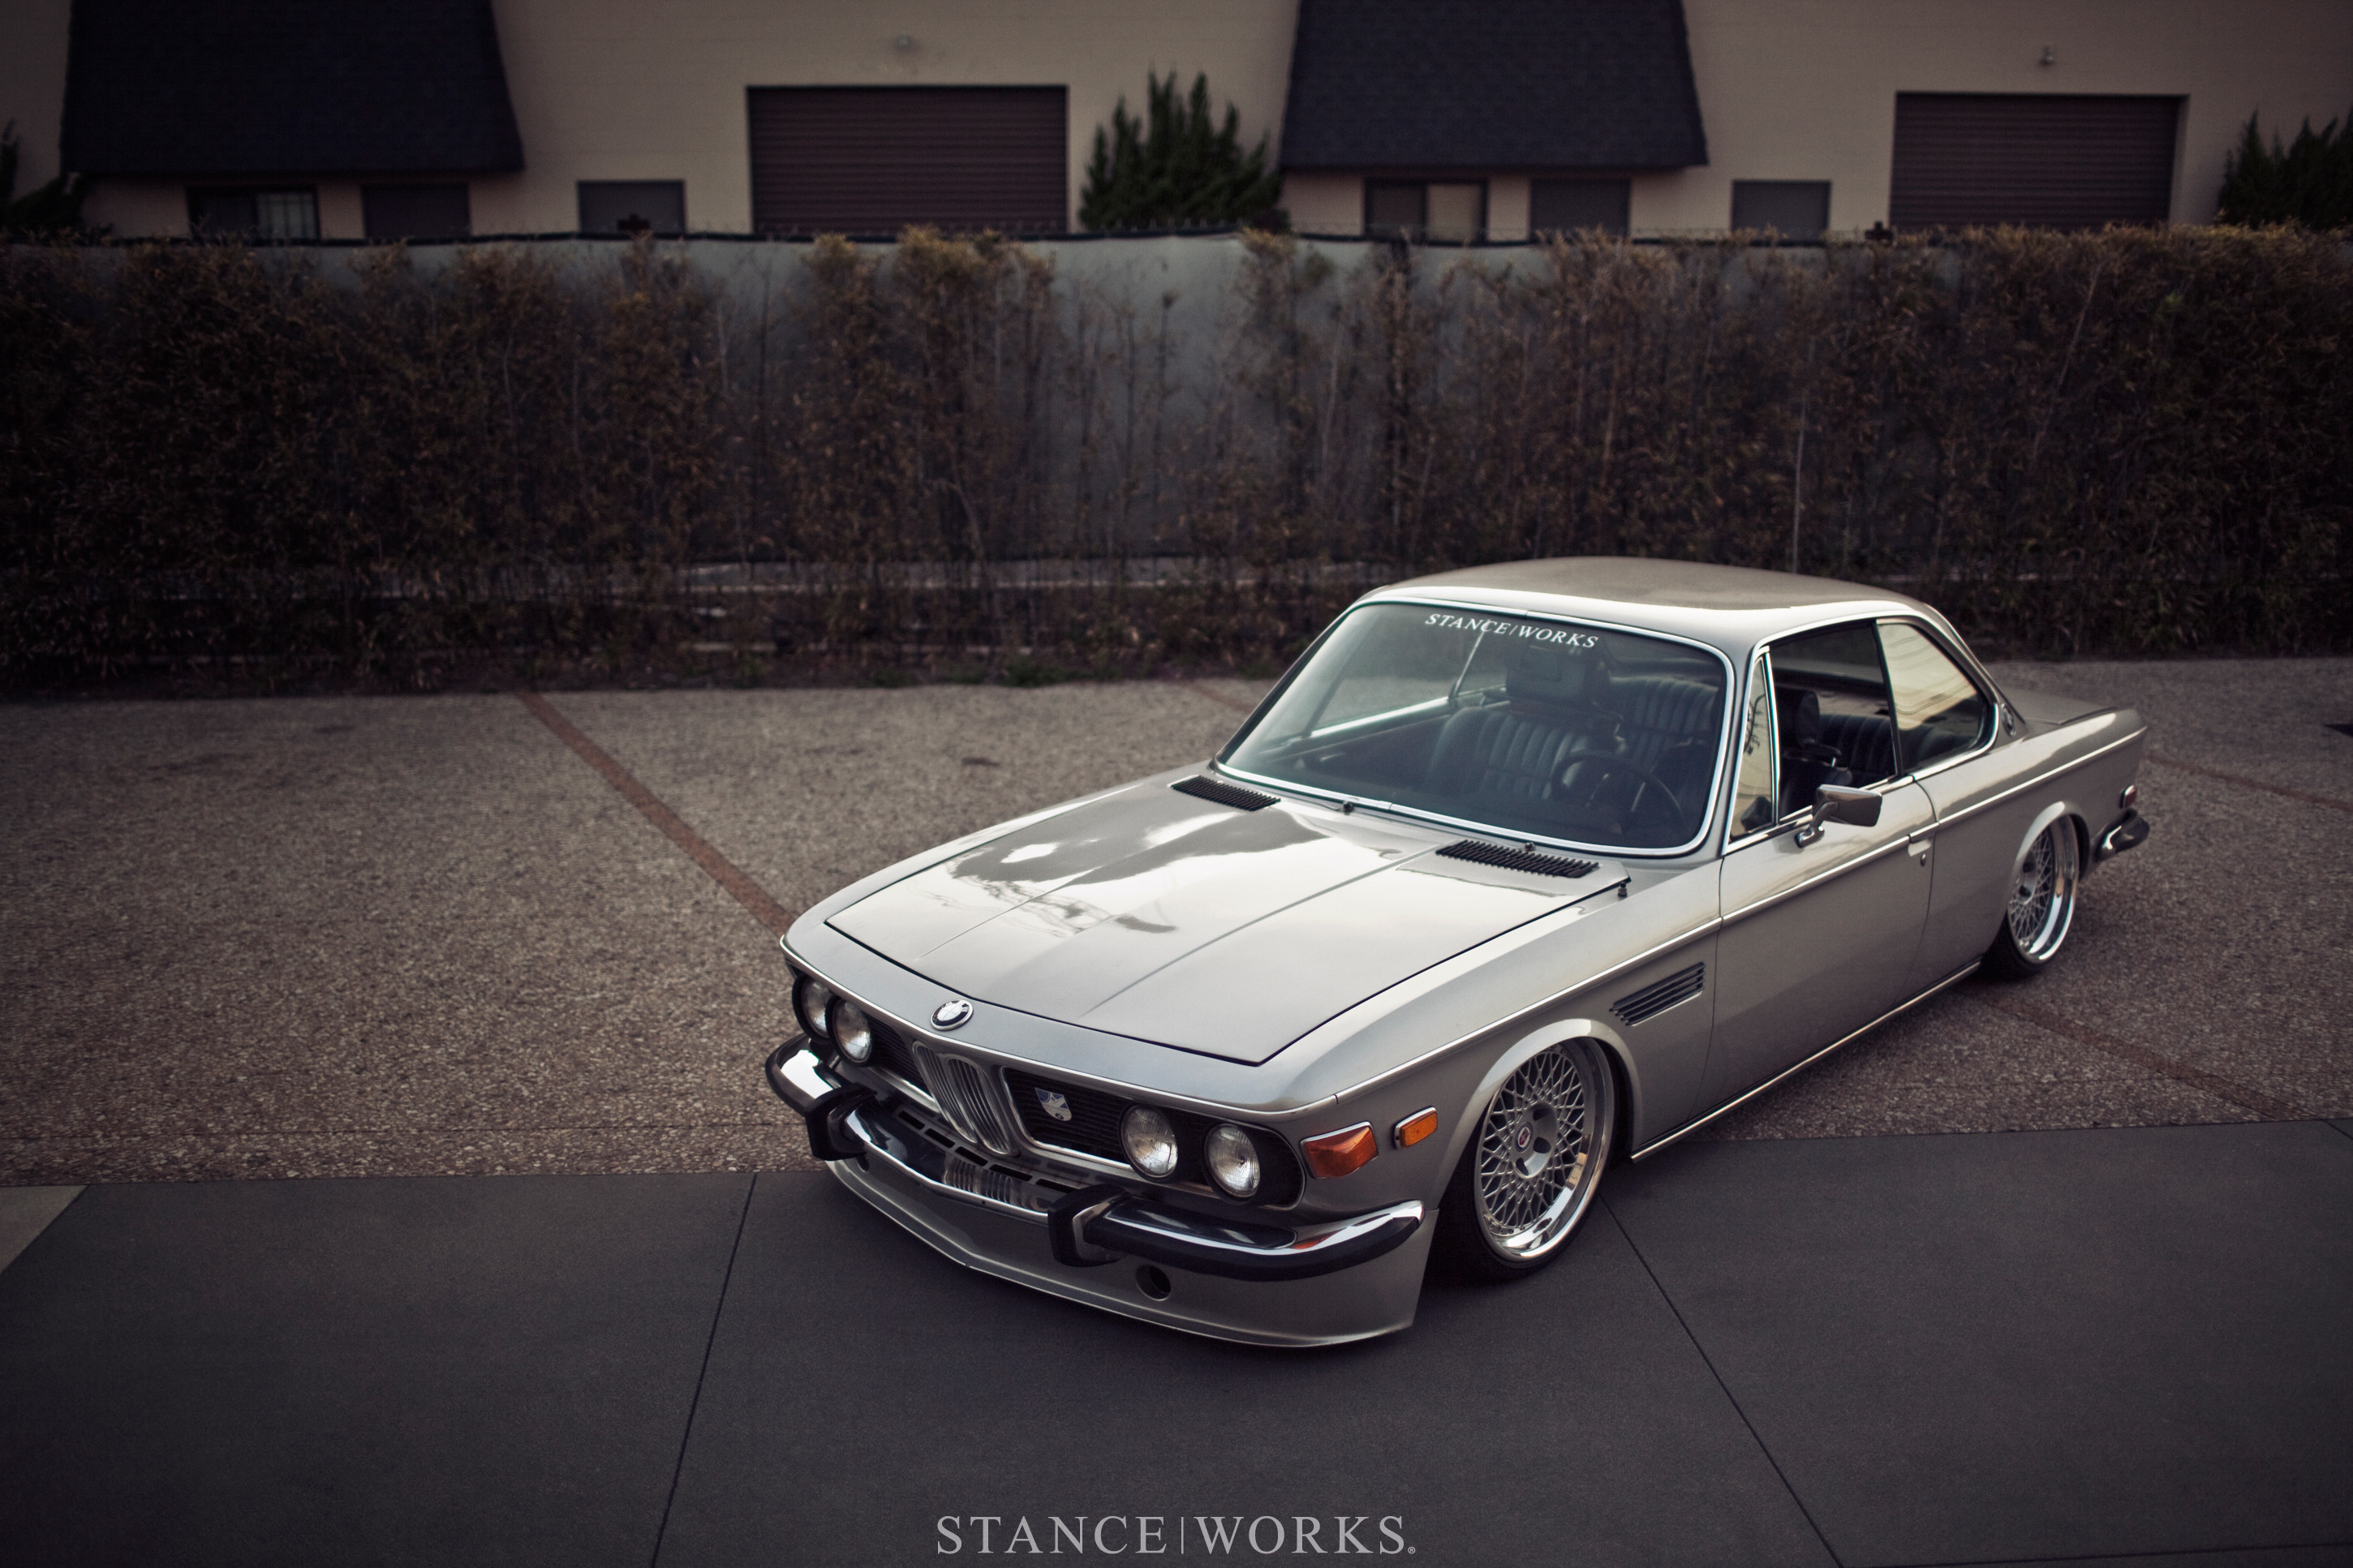 2900x1933 StanceWorks Wallpaper - the S|W E9 - Stance Works